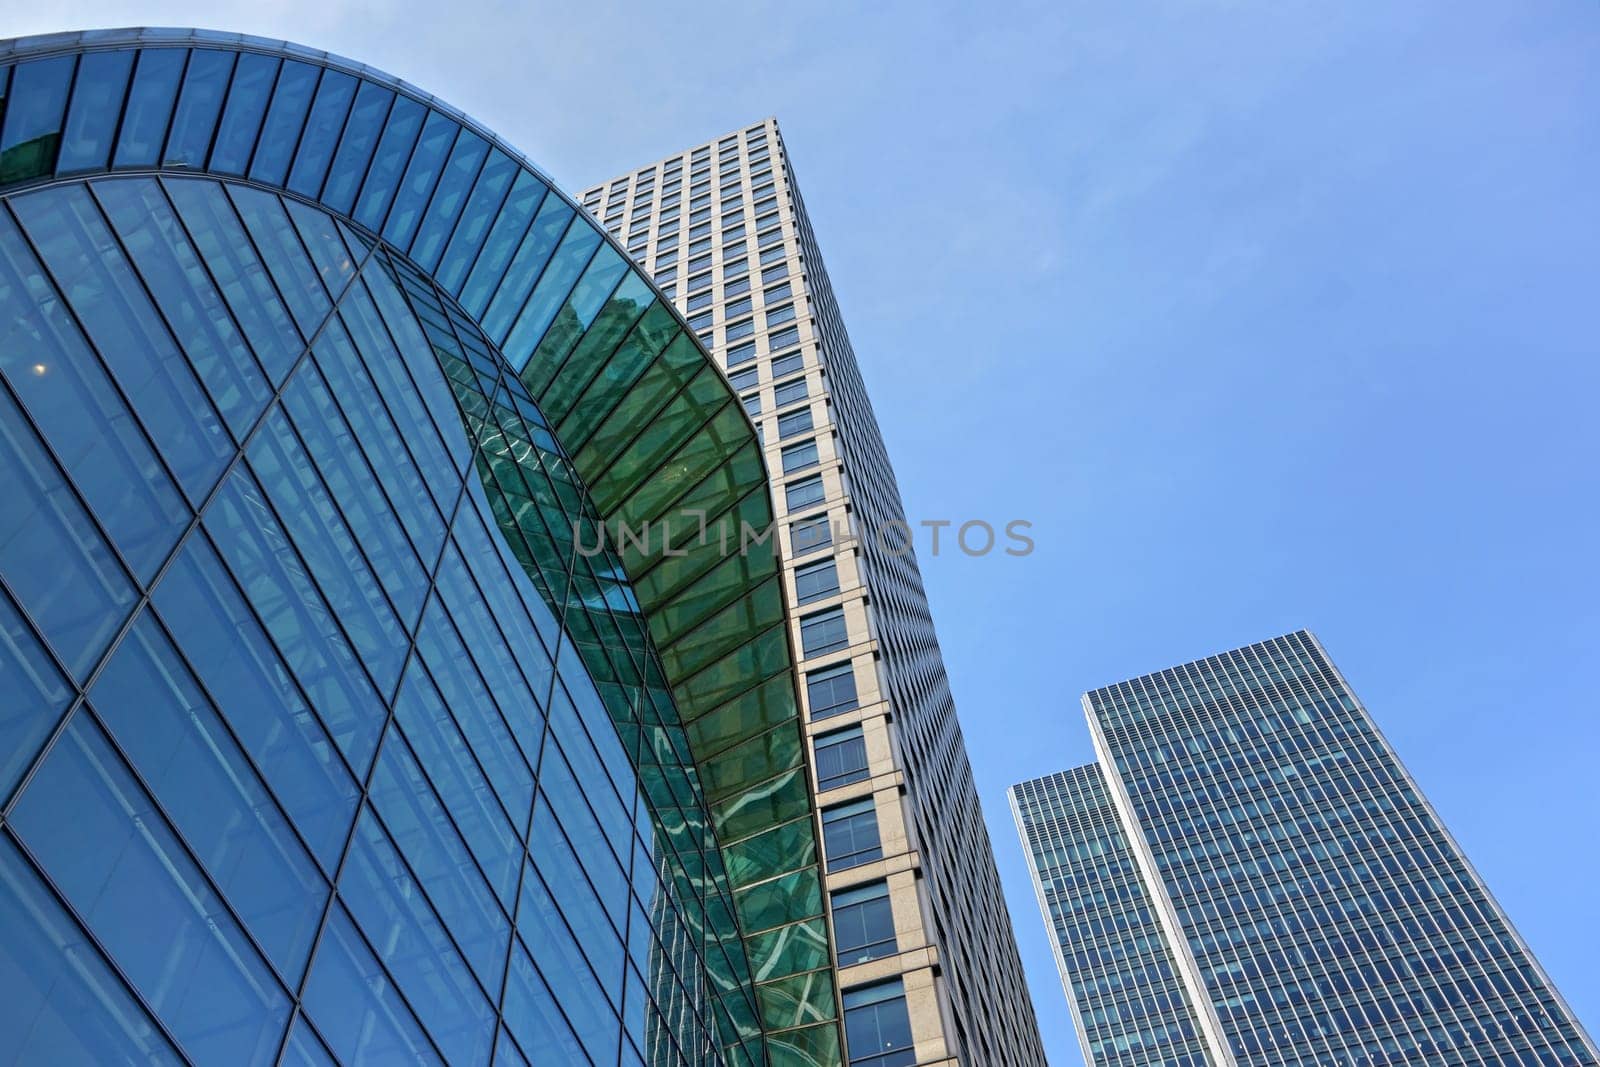 London, United Kingdom - February 03, 2019: Looking up Canada Water tube station entrance and 40 and 25 Bank Street buildings designed by Cesar Pelli & Associates on sunny day. by Ivanko